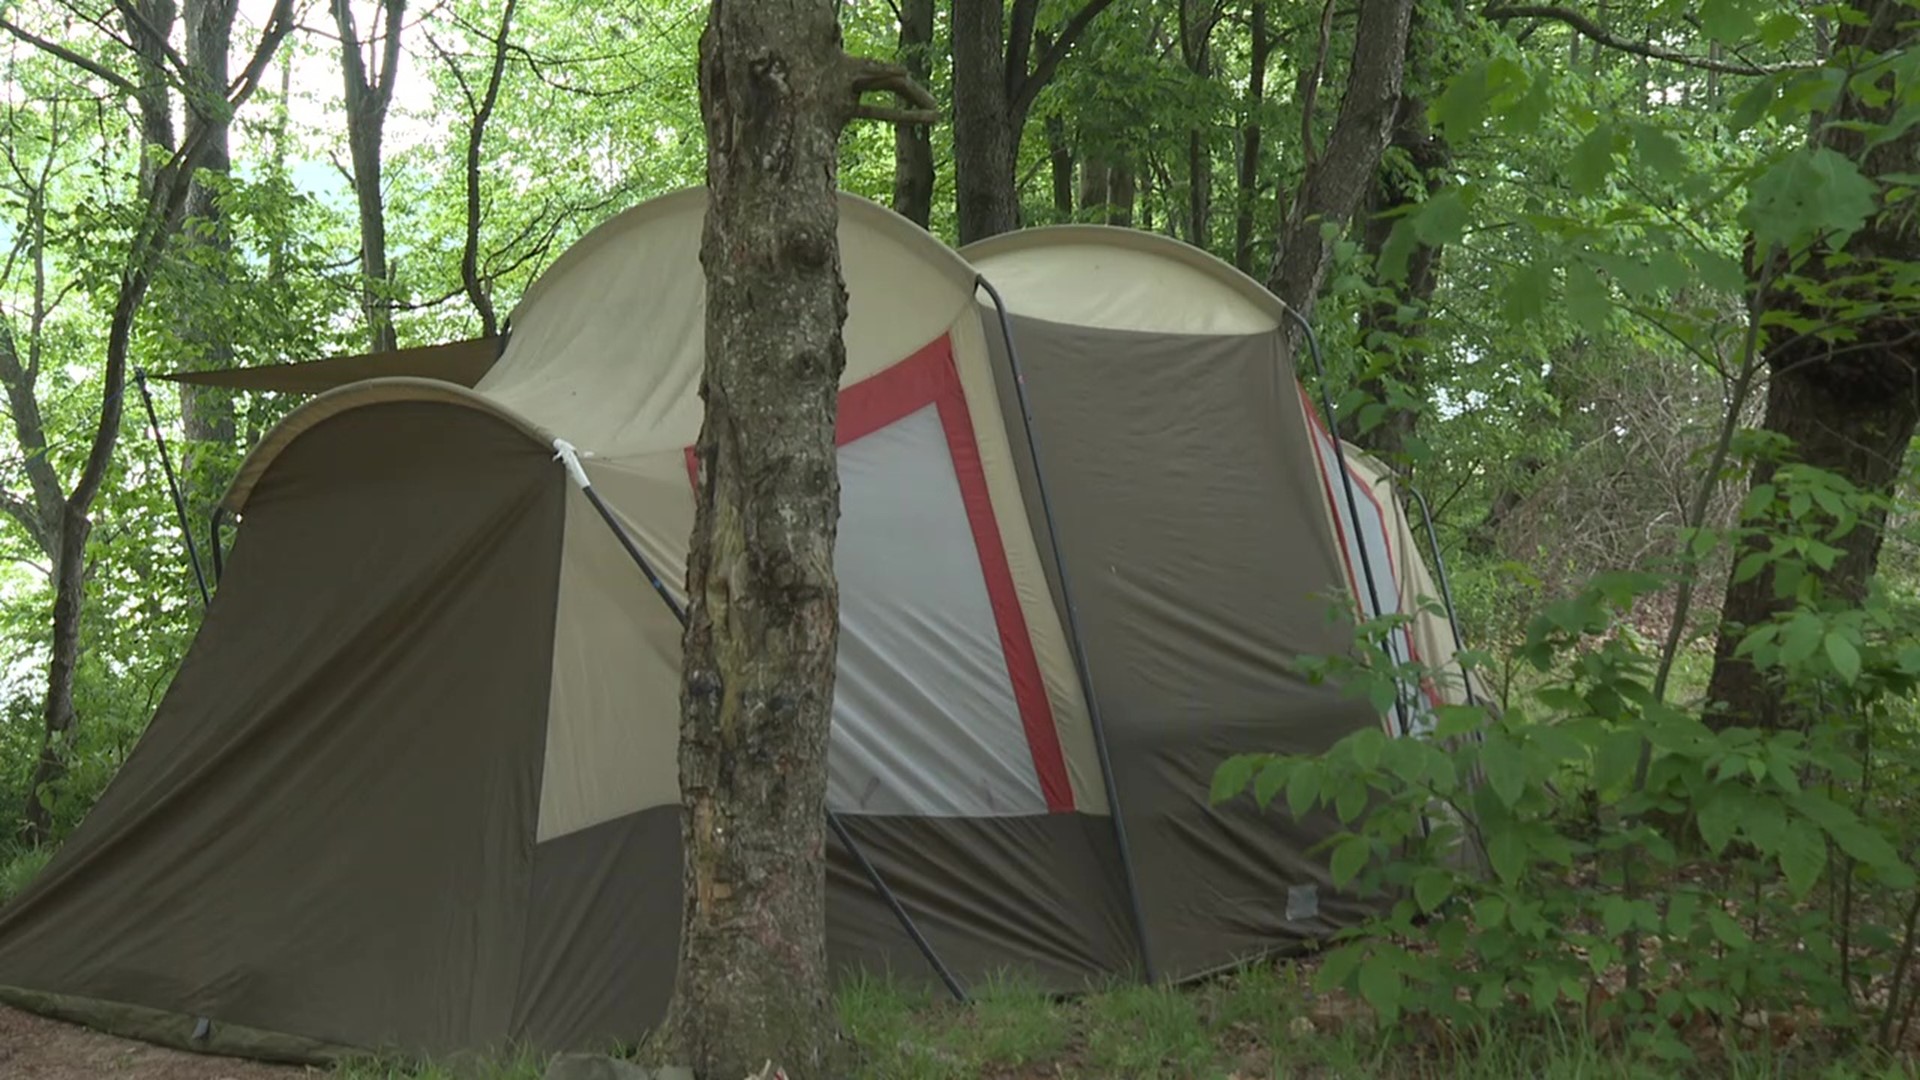 Despite thick smoke and haze on Wednesday, campers tell Newswatch 16 they weren't too concerned with being outside.